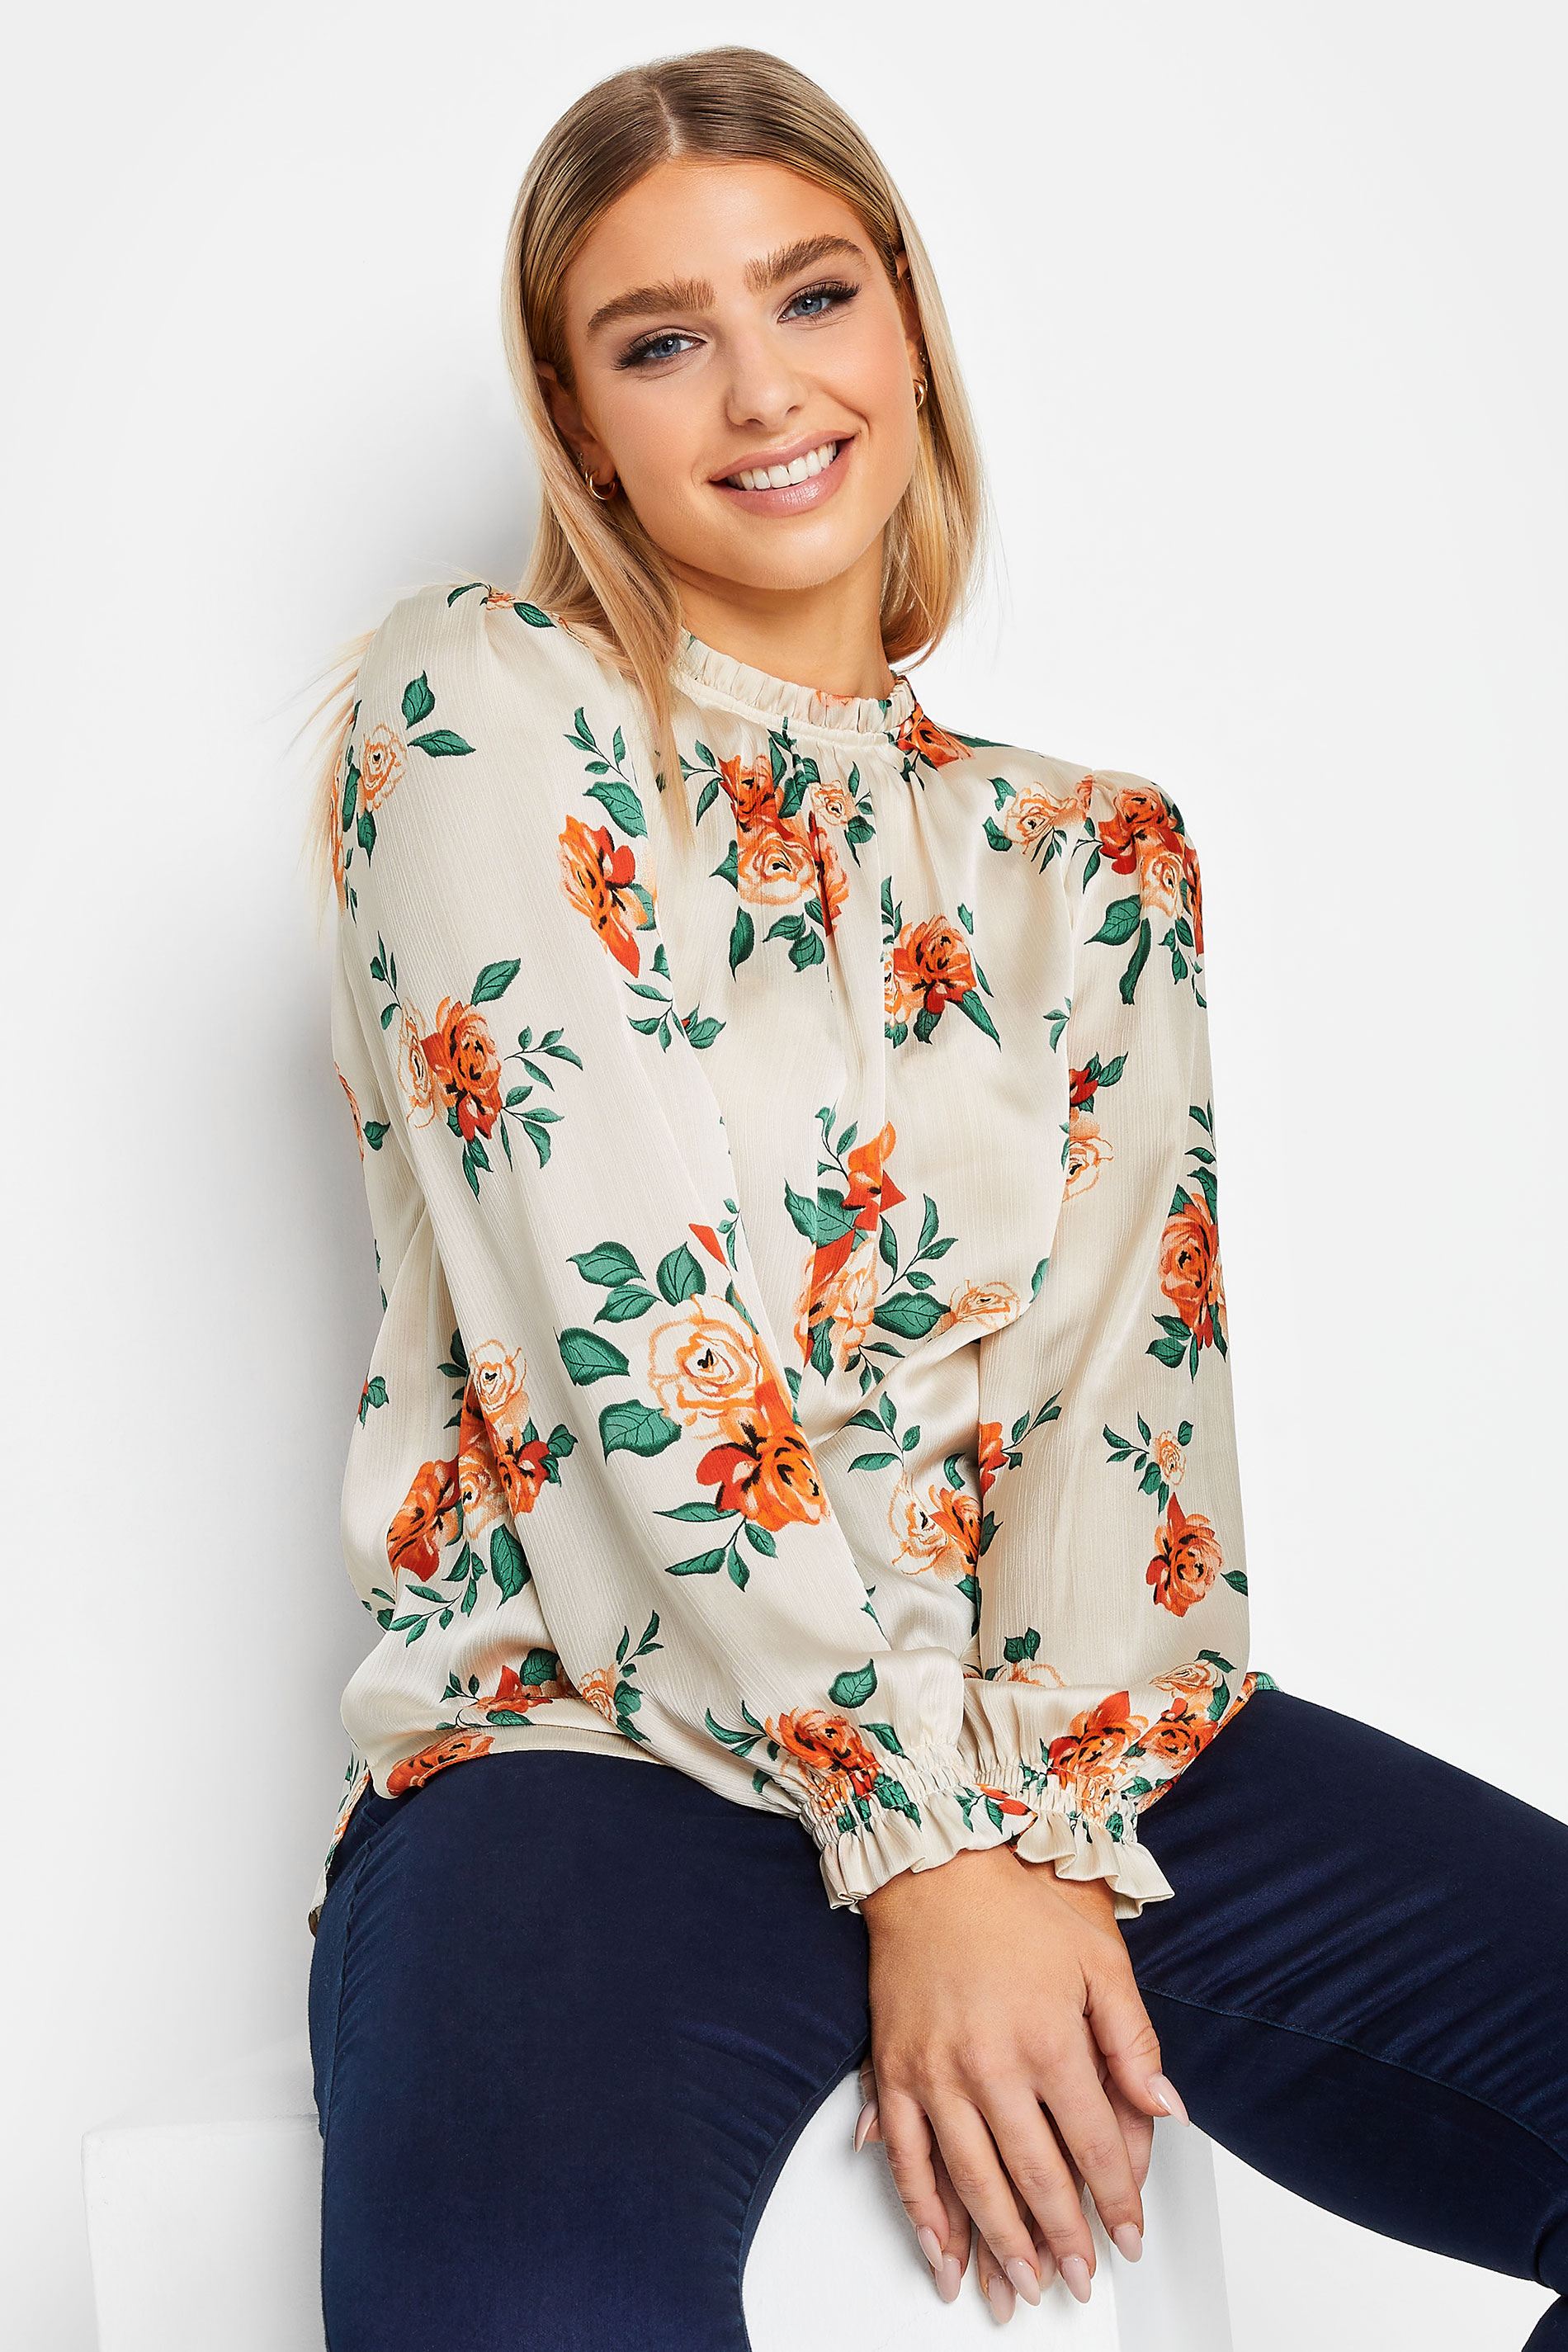 M&Co Ivory White Floral Print Frill Neck Blouse | M&Co 1